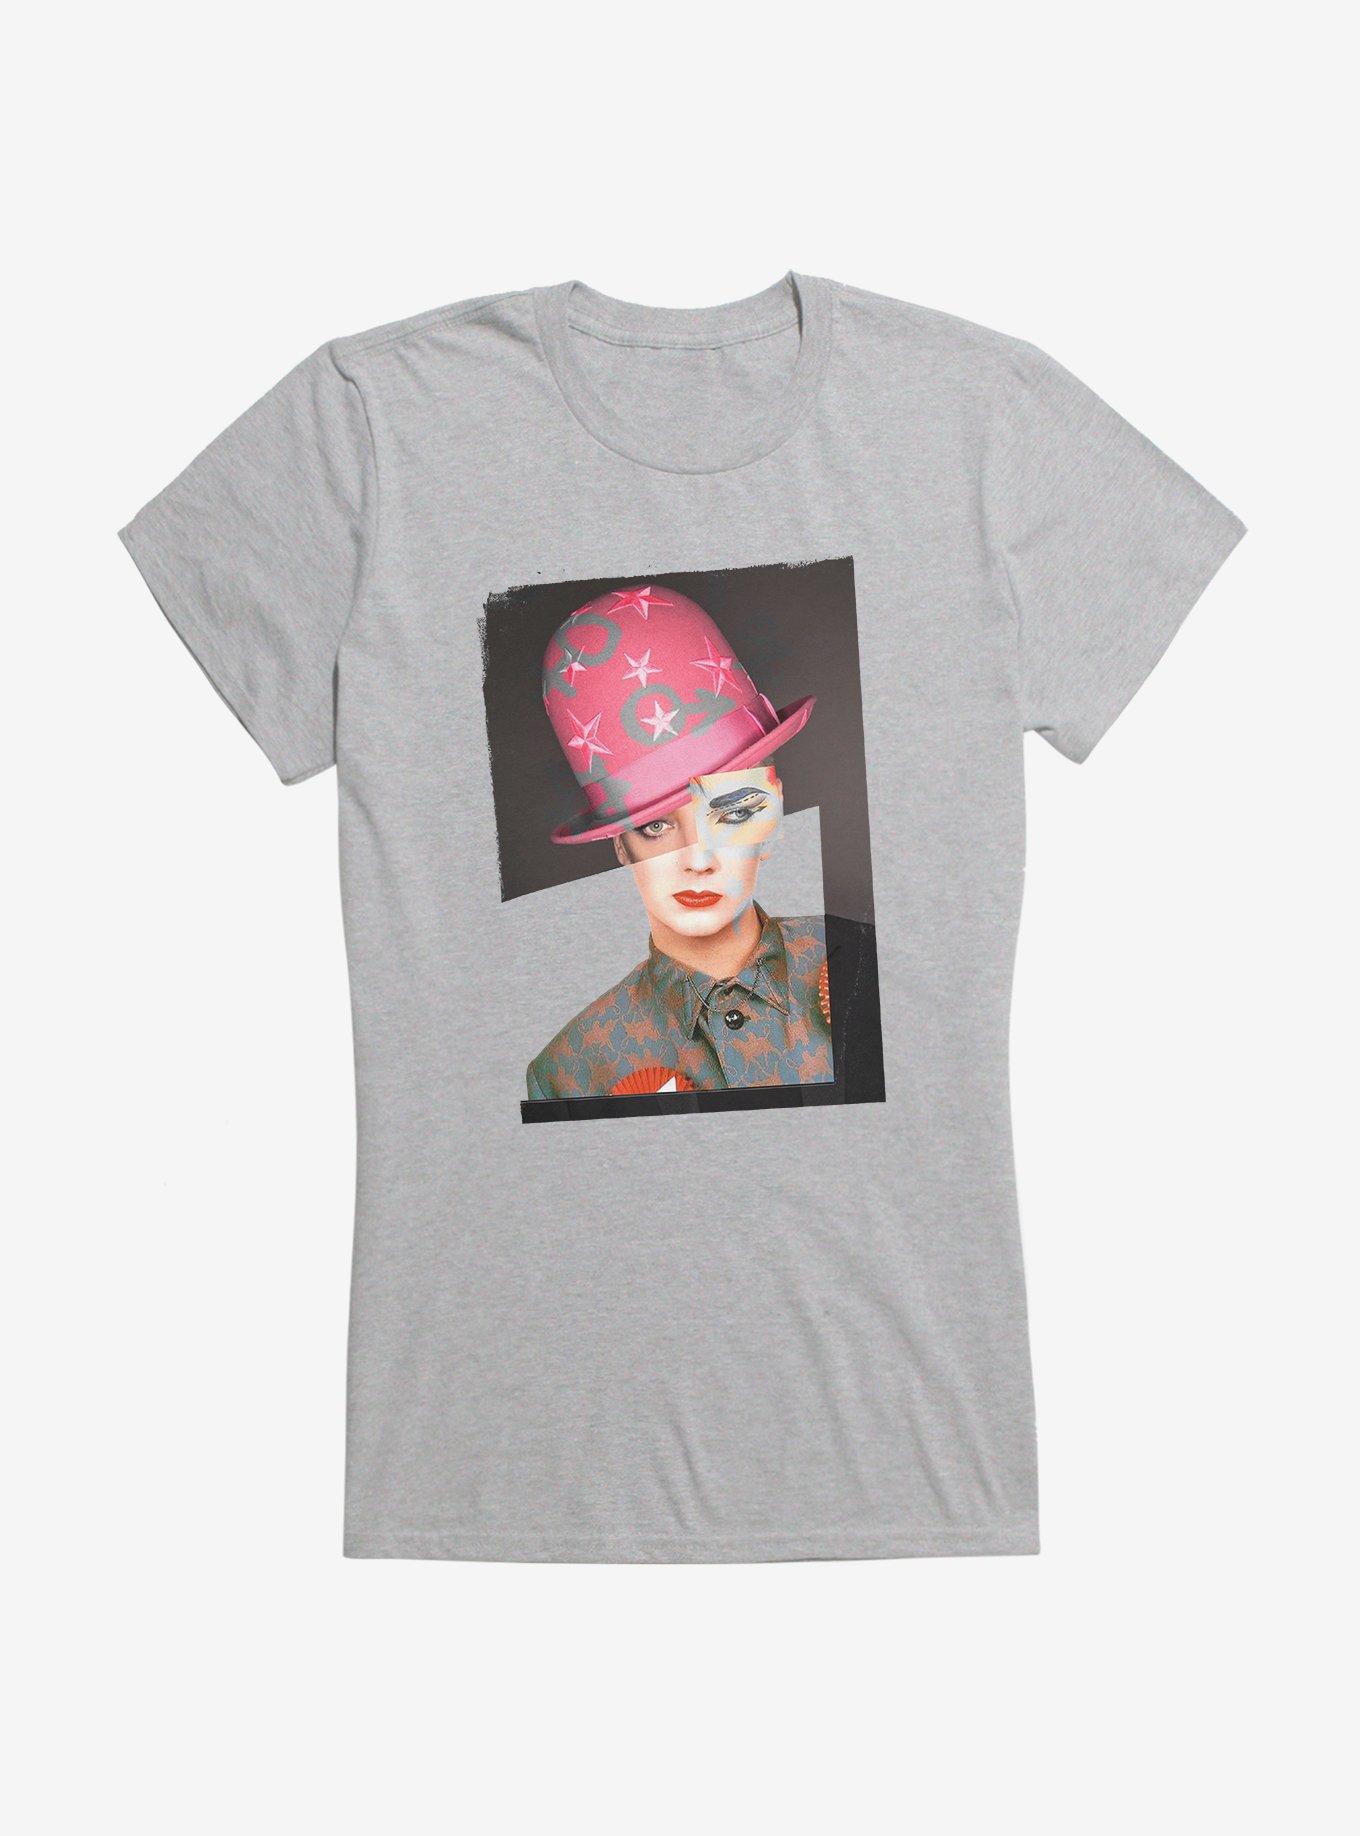 Boy George & Culture Club Picture Collage Girls T-Shirt, , hi-res